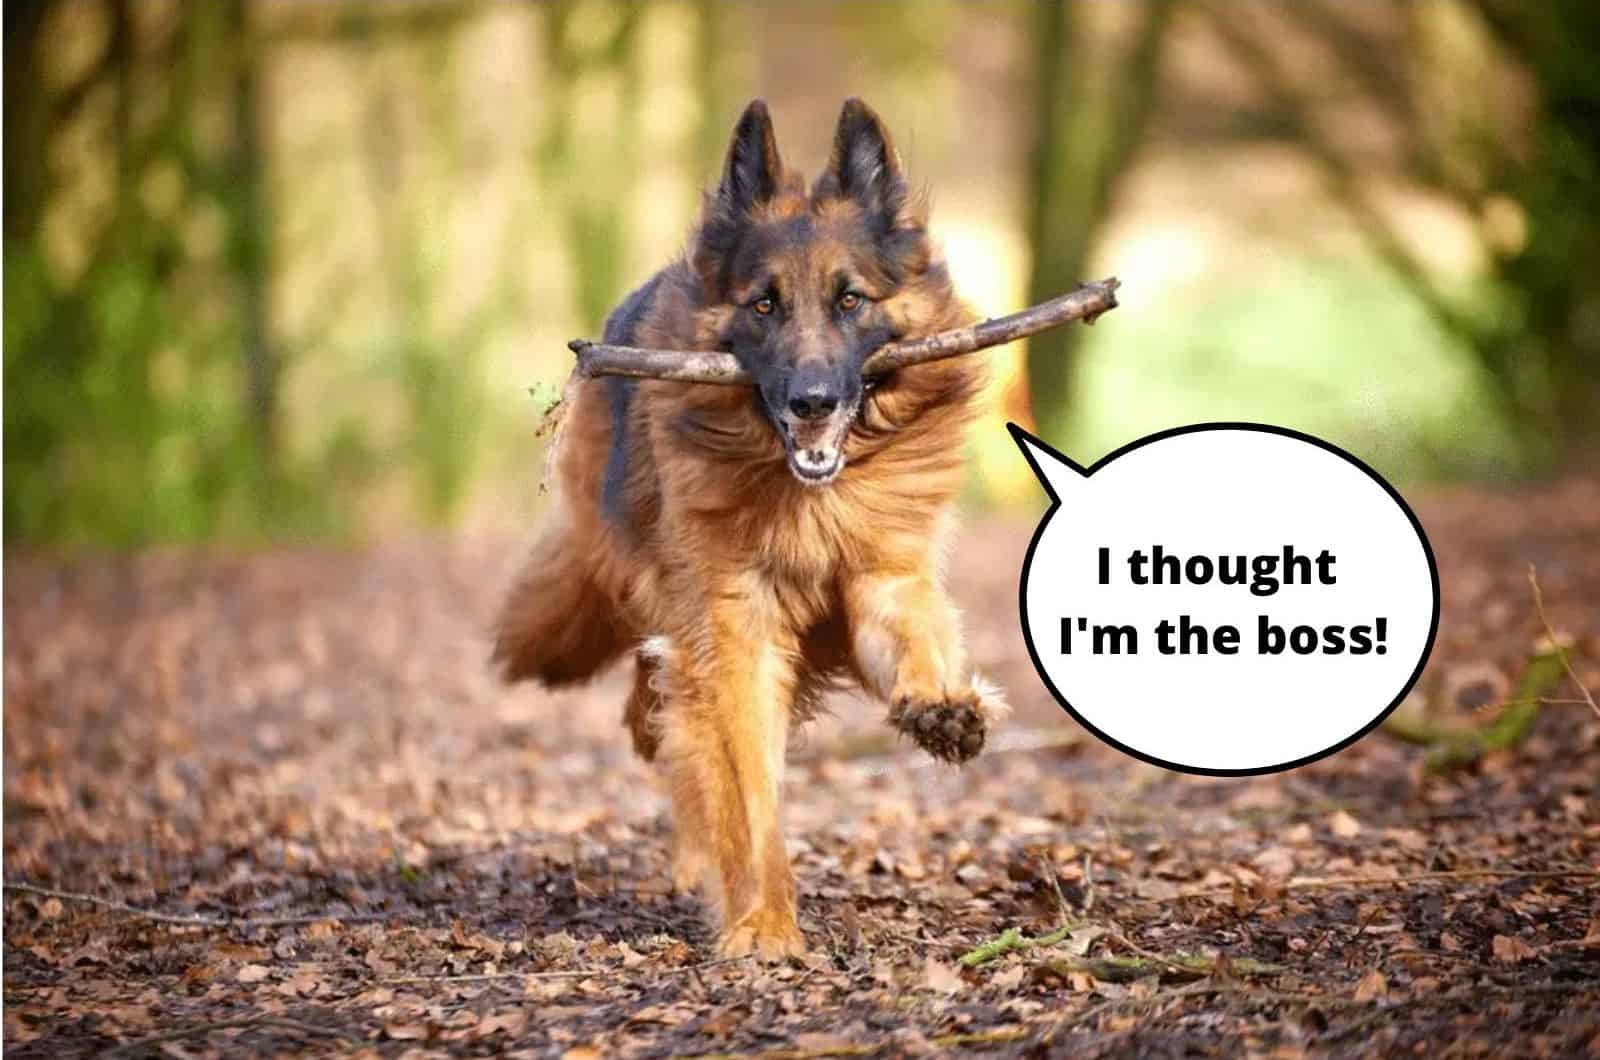 german shepherd running with a stick in his mouth in forest